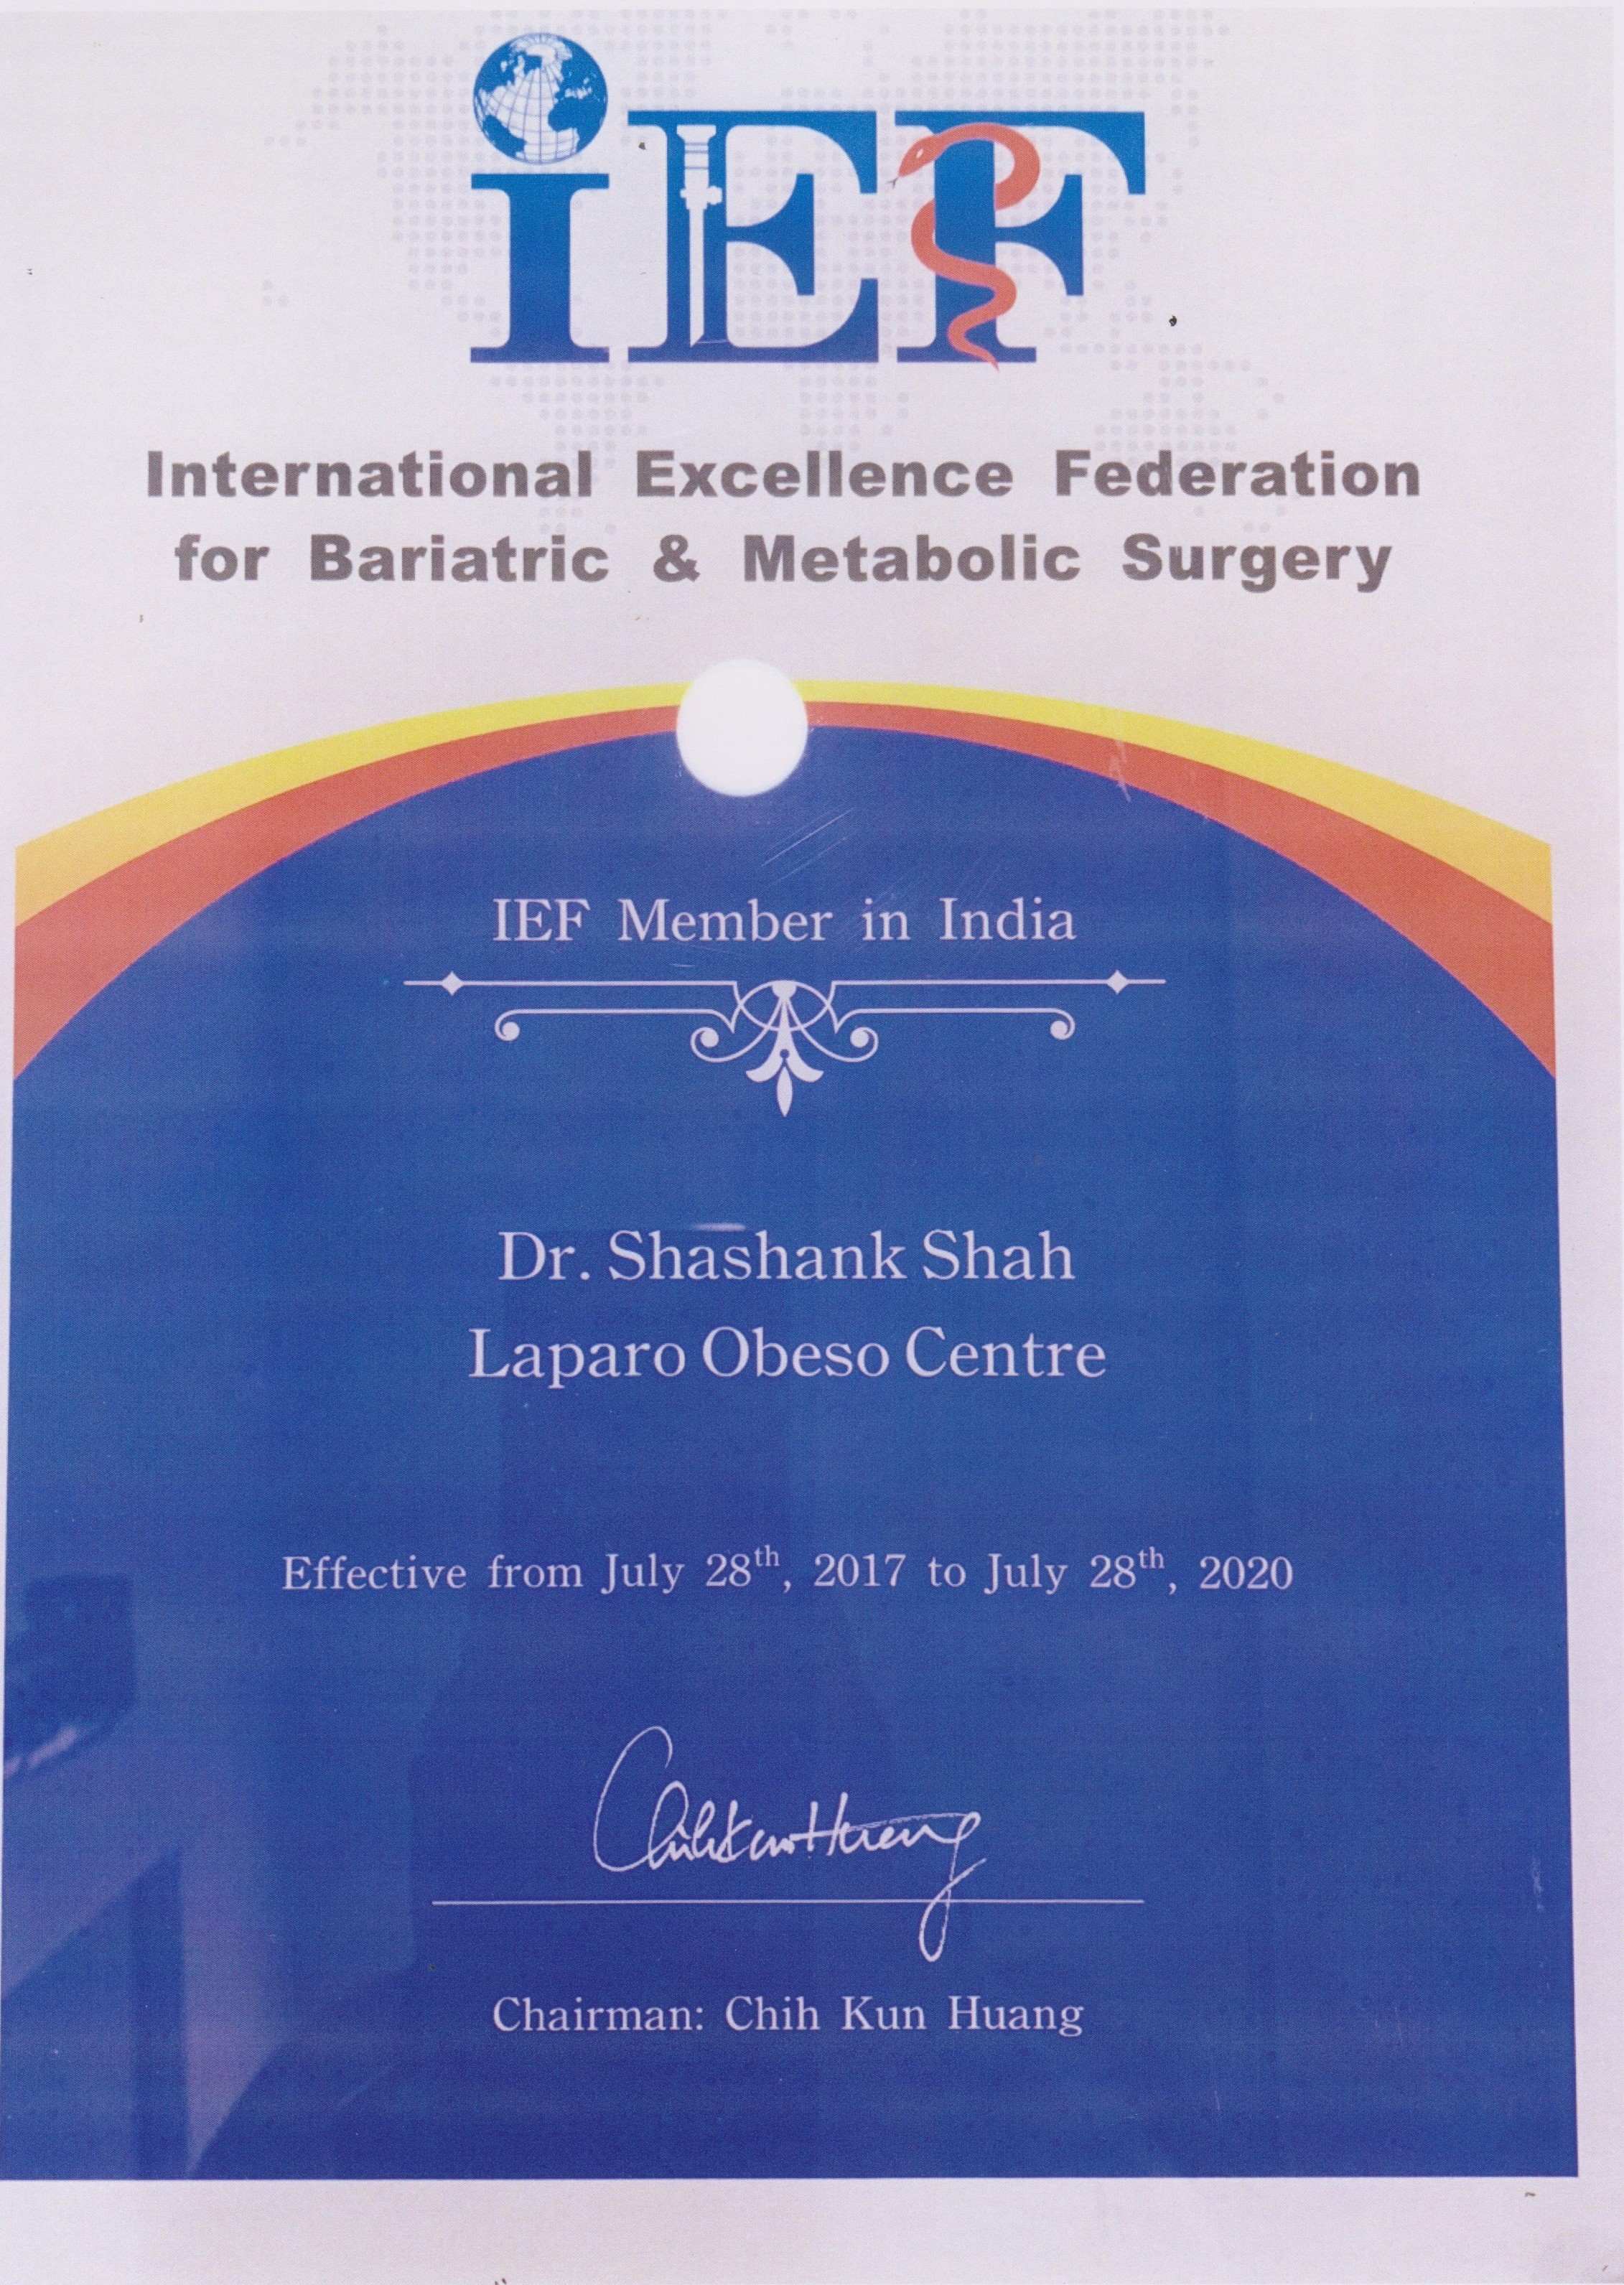 Dr Shashank Shah and Laparo Obeso Centre is the International Excellence Federation (IEF) Member, India from 2017-2020.

